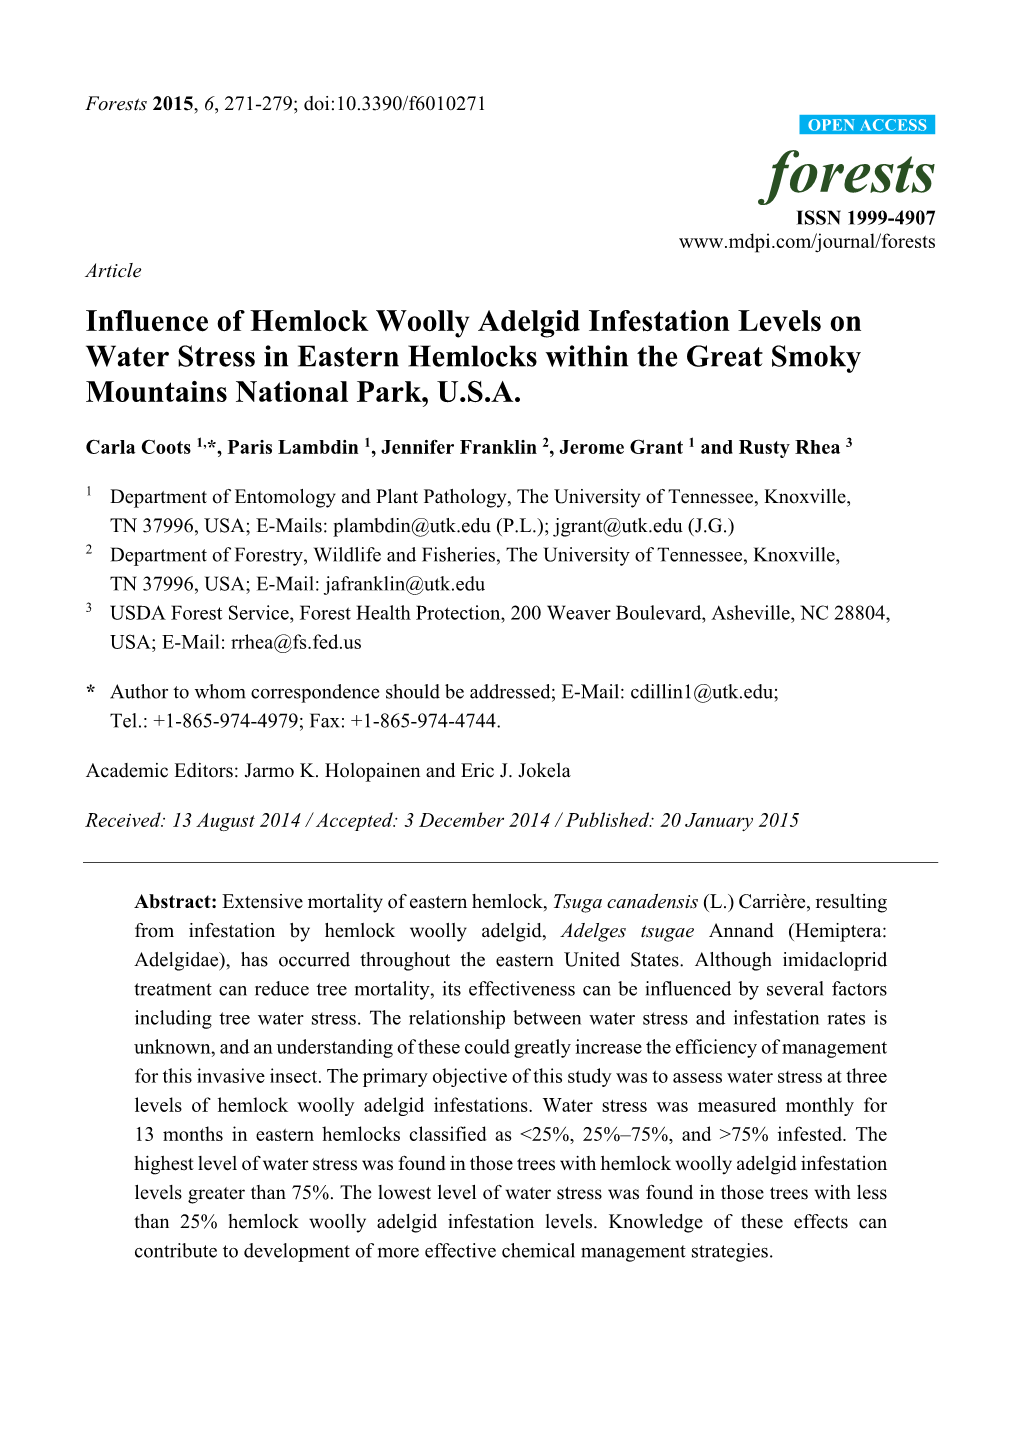 Influence of Hemlock Woolly Adelgid Infestation Levels on Water Stress in Eastern Hemlocks Within the Great Smoky Mountains National Park, U.S.A